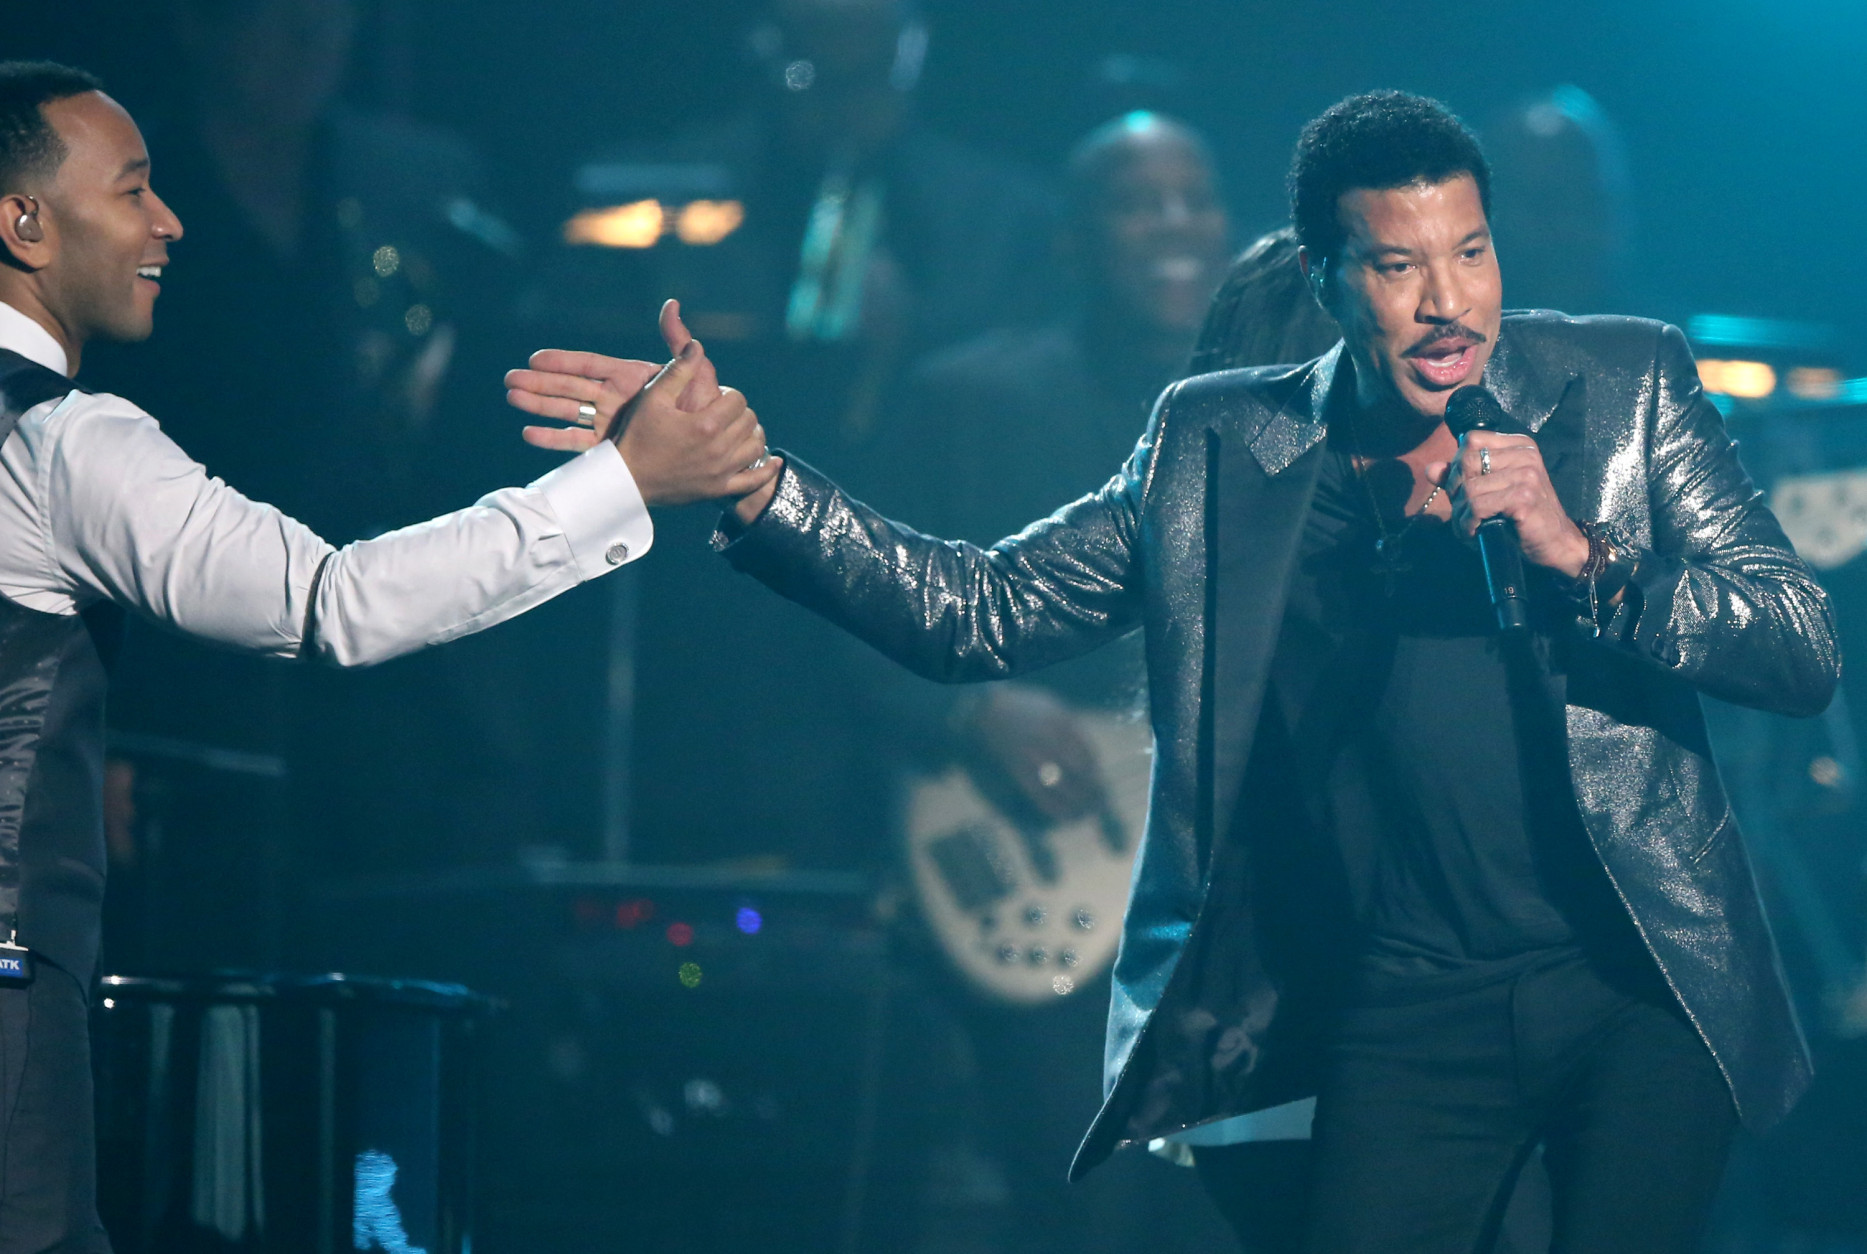 John Legend, left, and Lionel Richie perform during a tribute in his honor at the 58th annual Grammy Awards on Monday, Feb. 15, 2016, in Los Angeles. (Photo by Matt Sayles/Invision/AP)